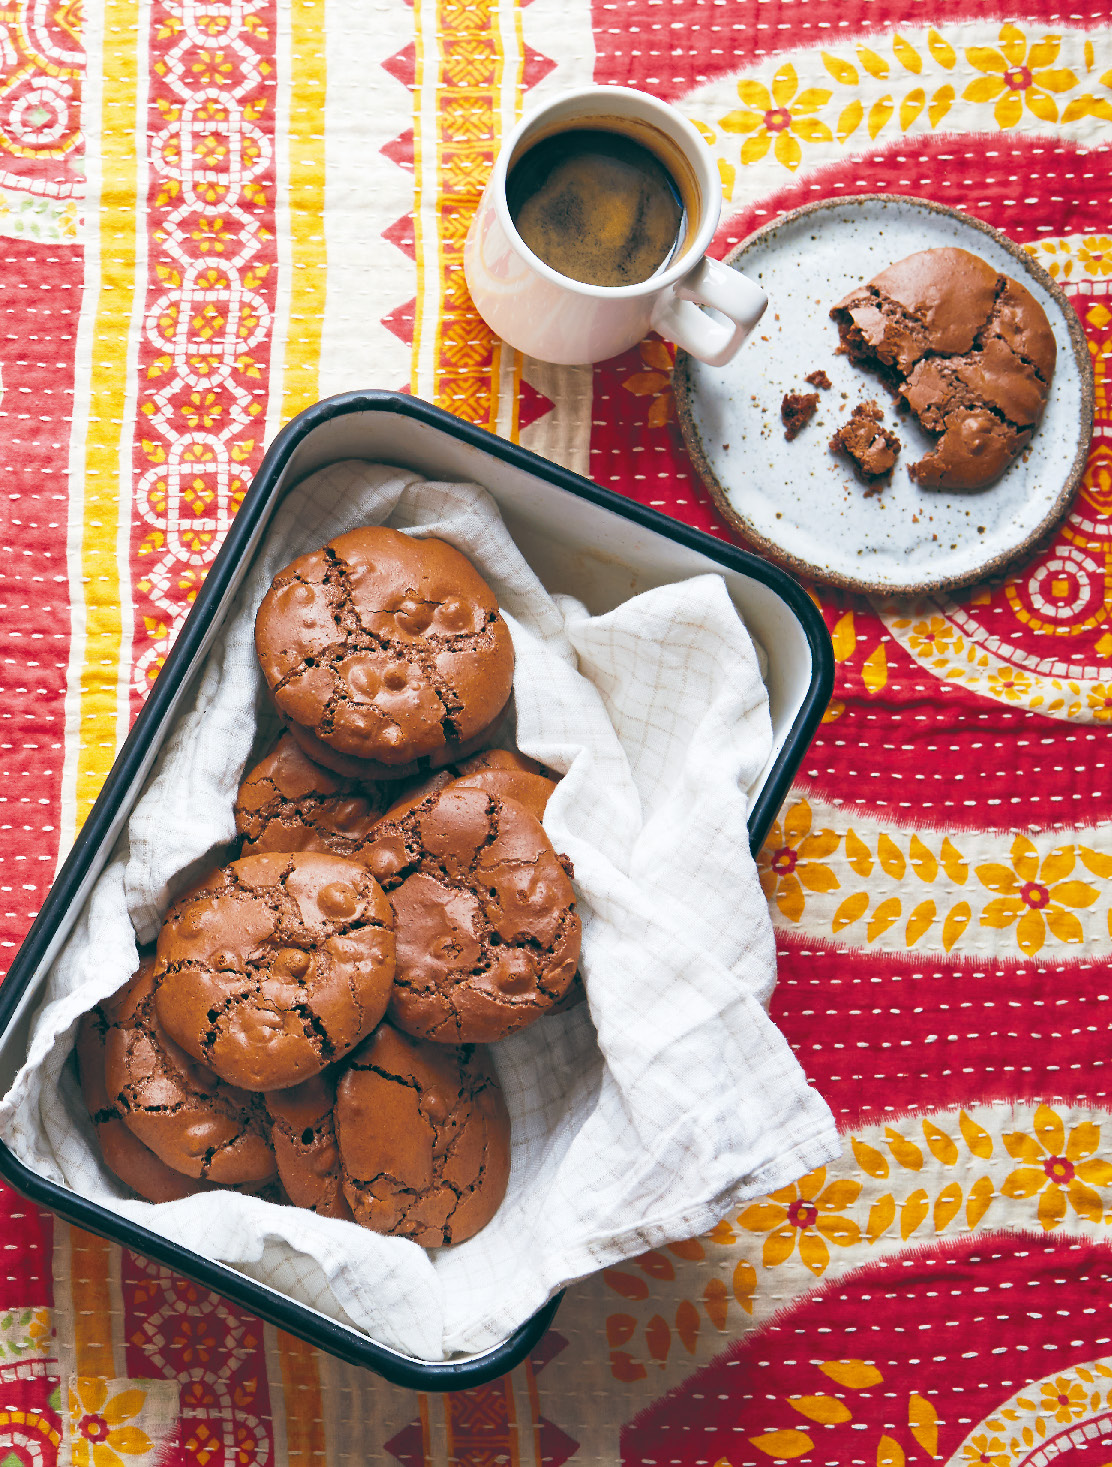 Chocolate & fennel cookies